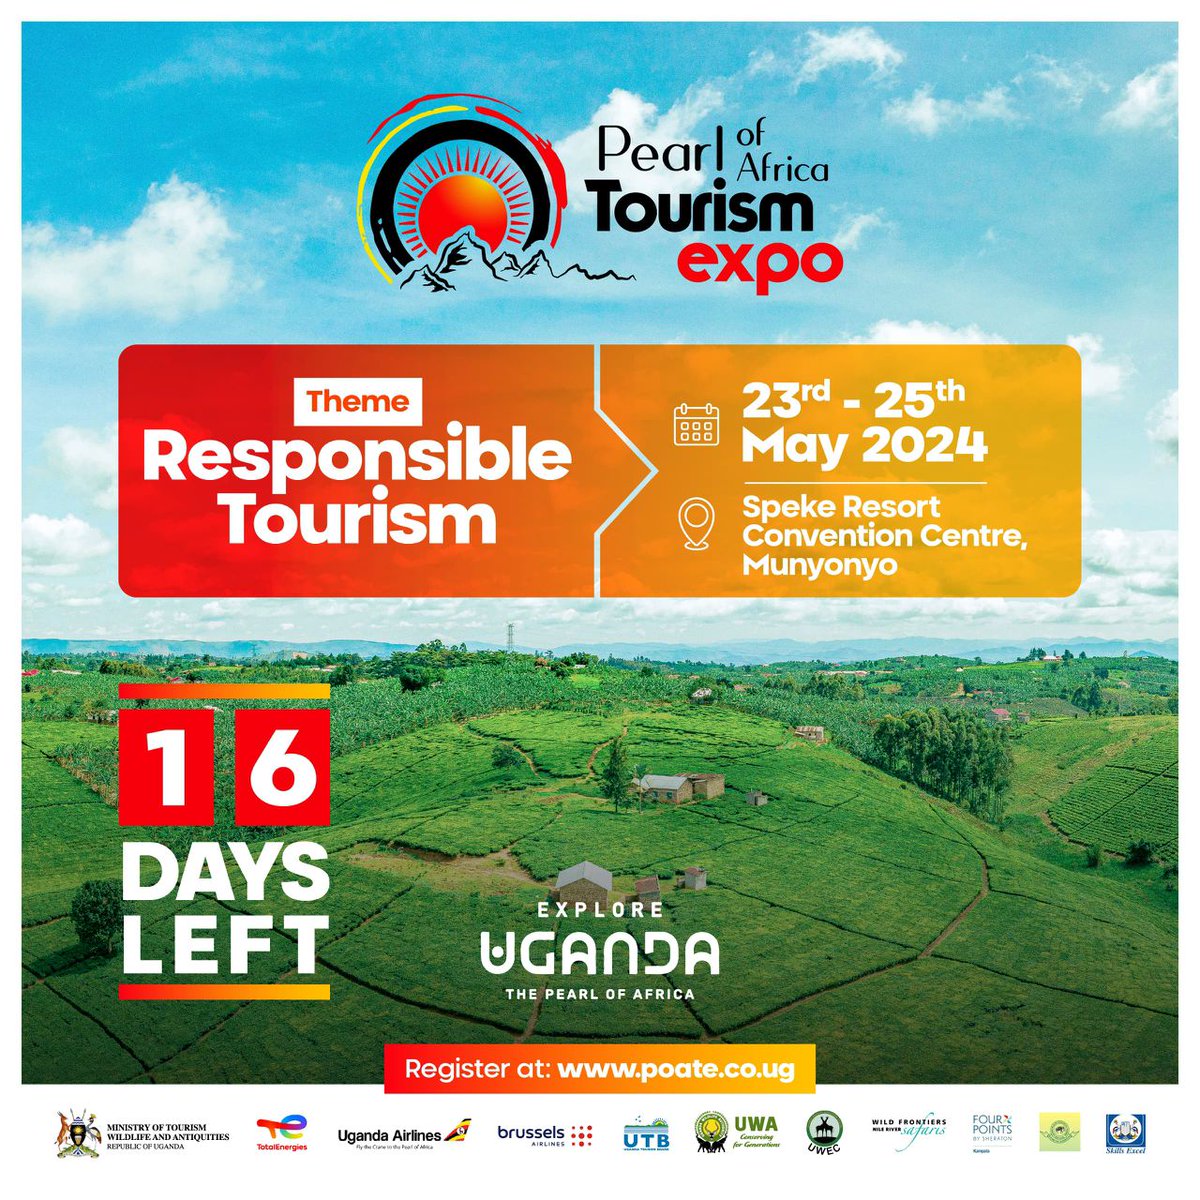 It's just 16 Days left to The Pearl of Africa Tourism Expo (POATE), the annual tourism and travel trade show organised by the Uganda Tourism Board. The expo brings together tourism value chain actors and stakeholders under the Business to business and Business to Consumer…